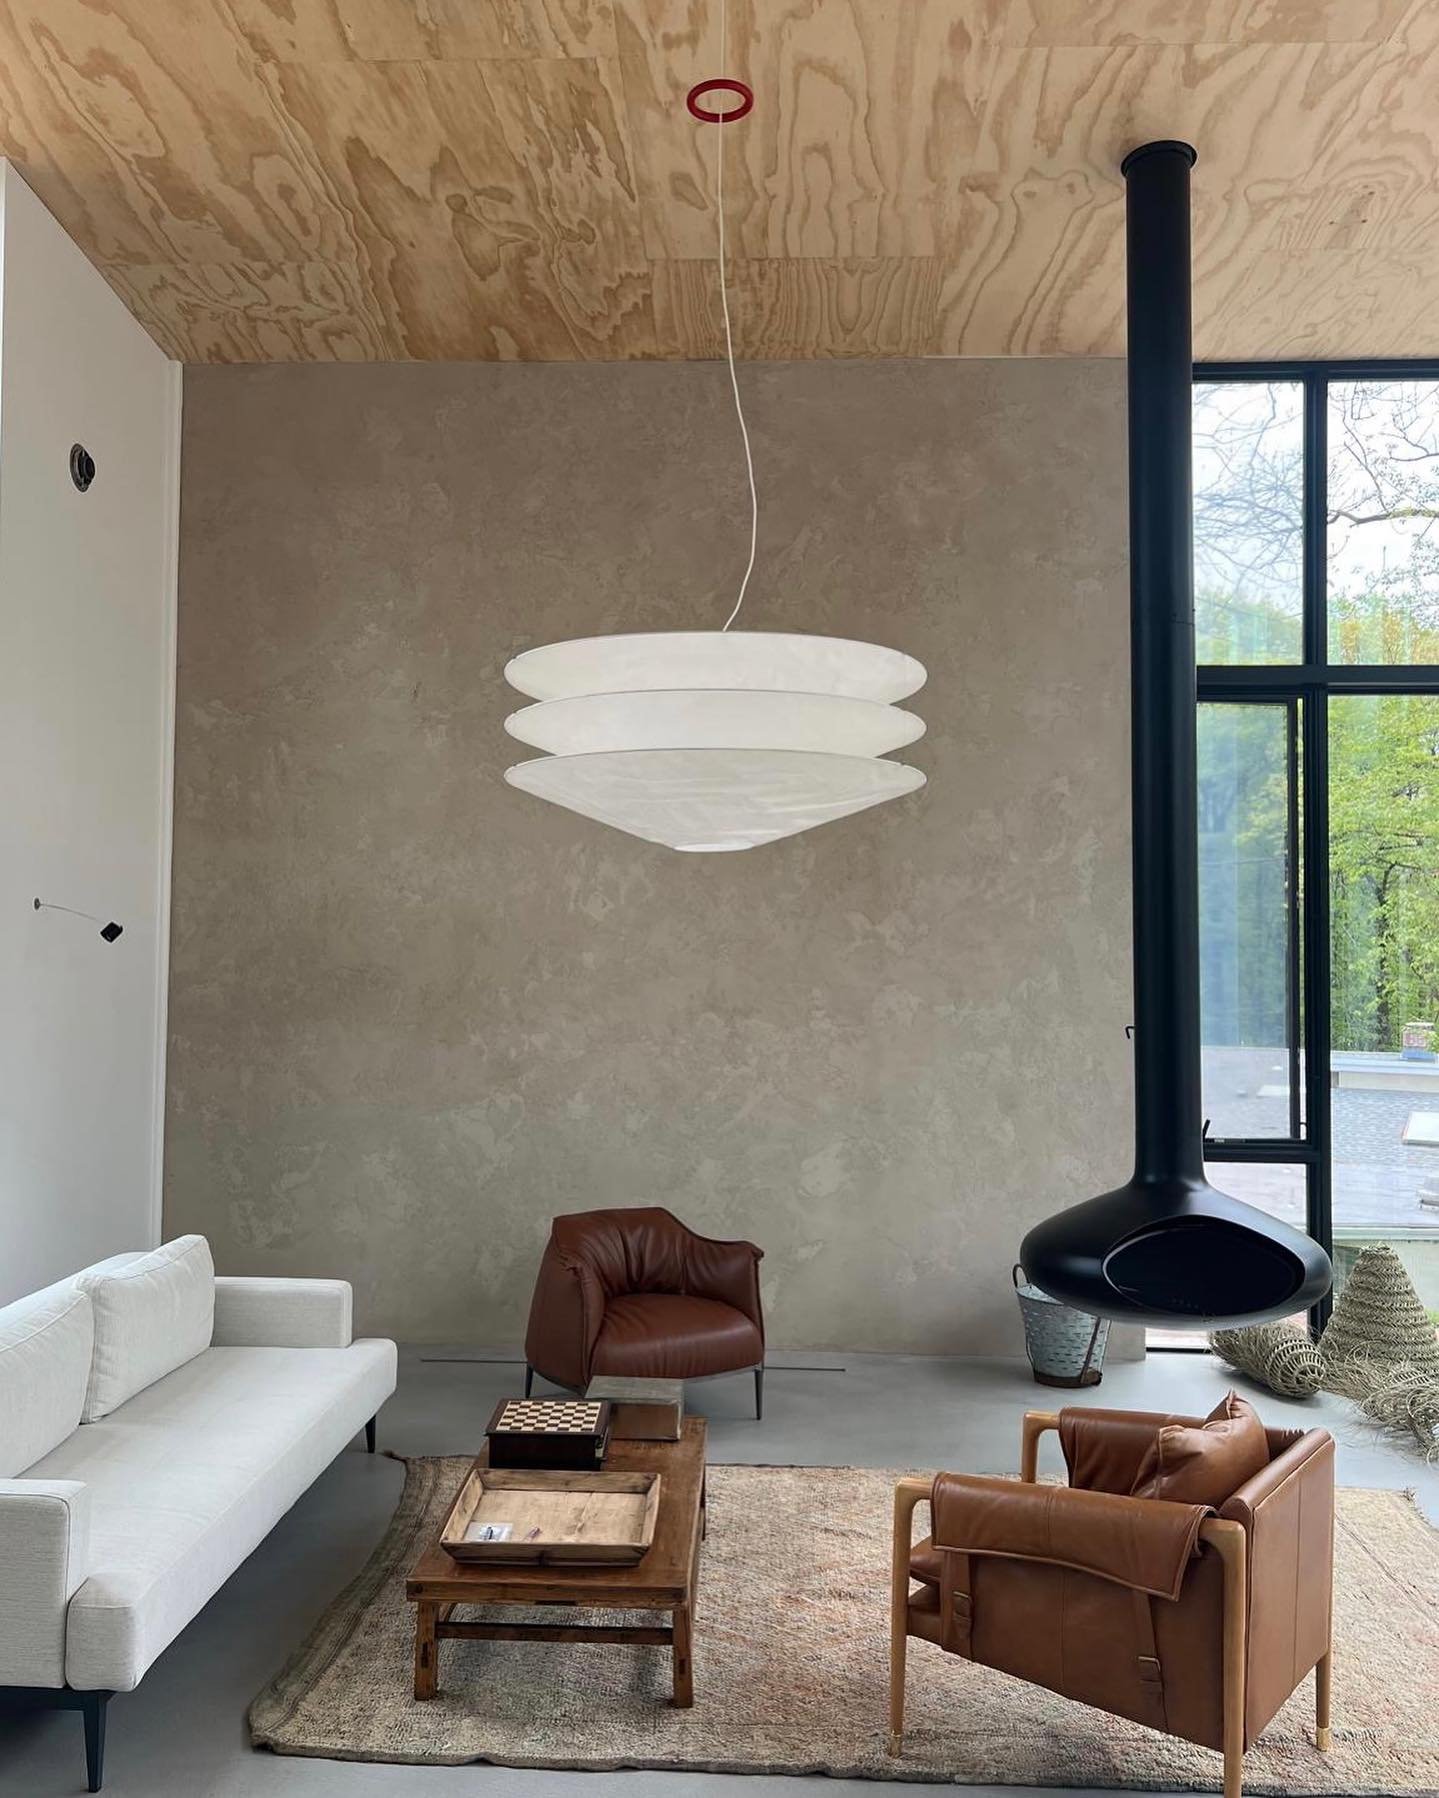 Sneak peak from our Tenafly project! Our design team worked with @ingomaurer_official to customize the Floatation to accommodate the project&rsquo;s unique ceiling height. 

#light #lighting #lightingdesign #lightingdesigner #lightingarchitect #light